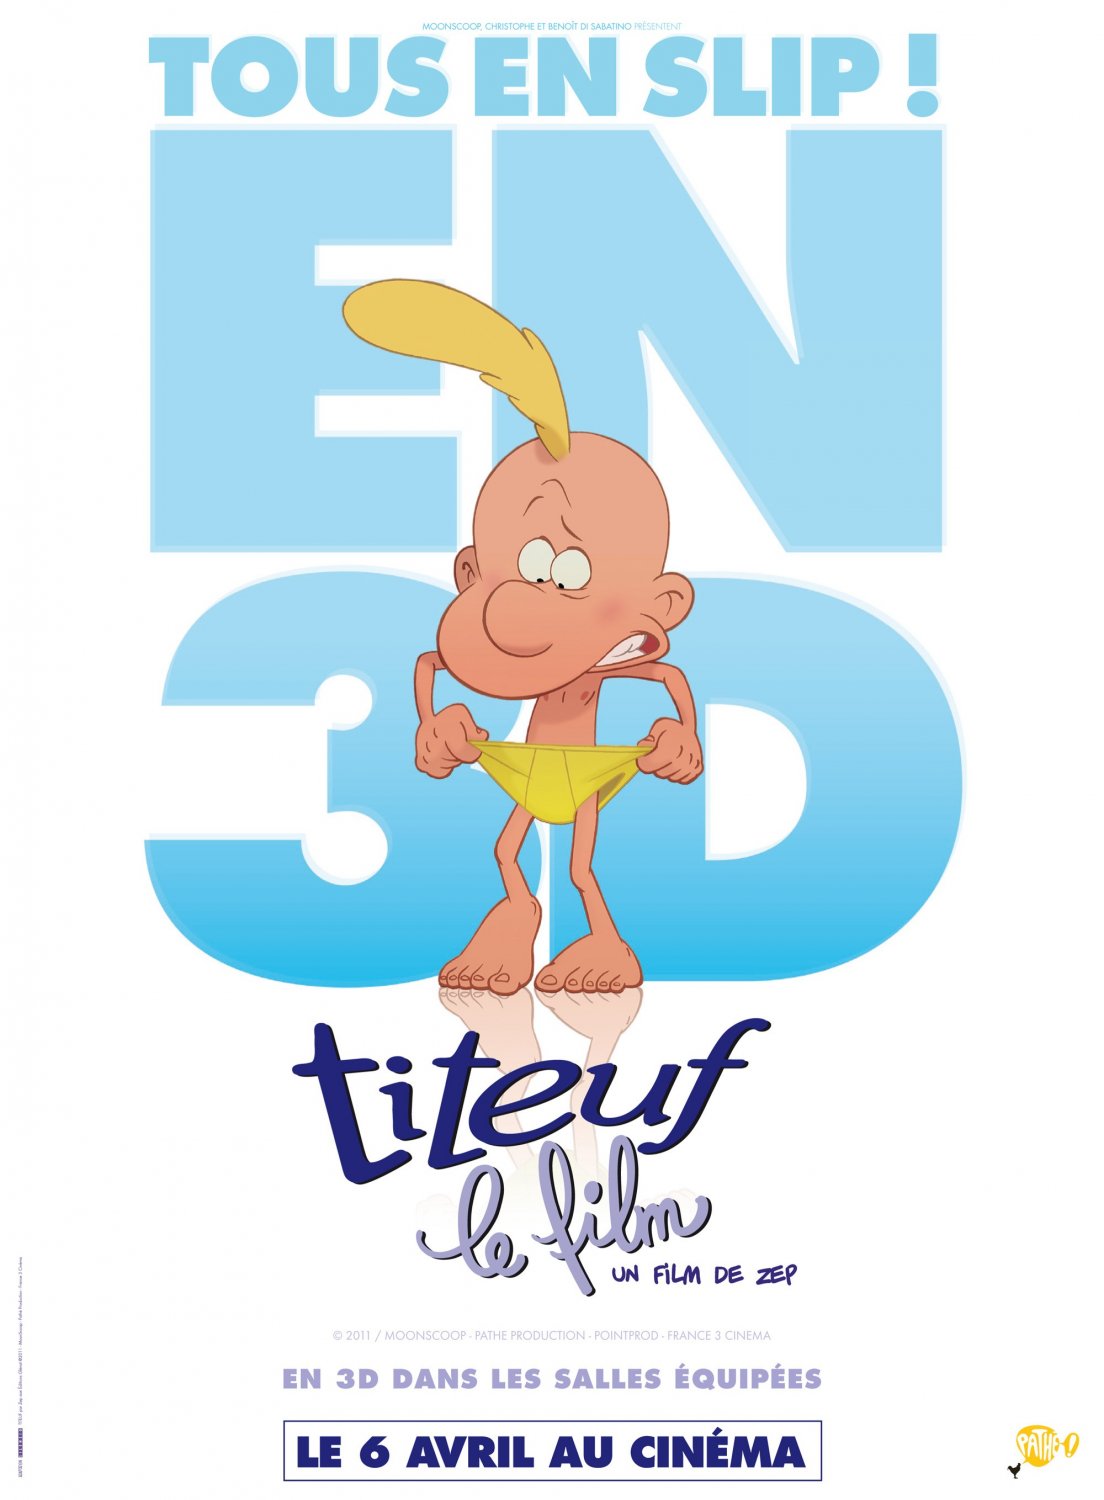 Extra Large Movie Poster Image for Titeuf: The Film 